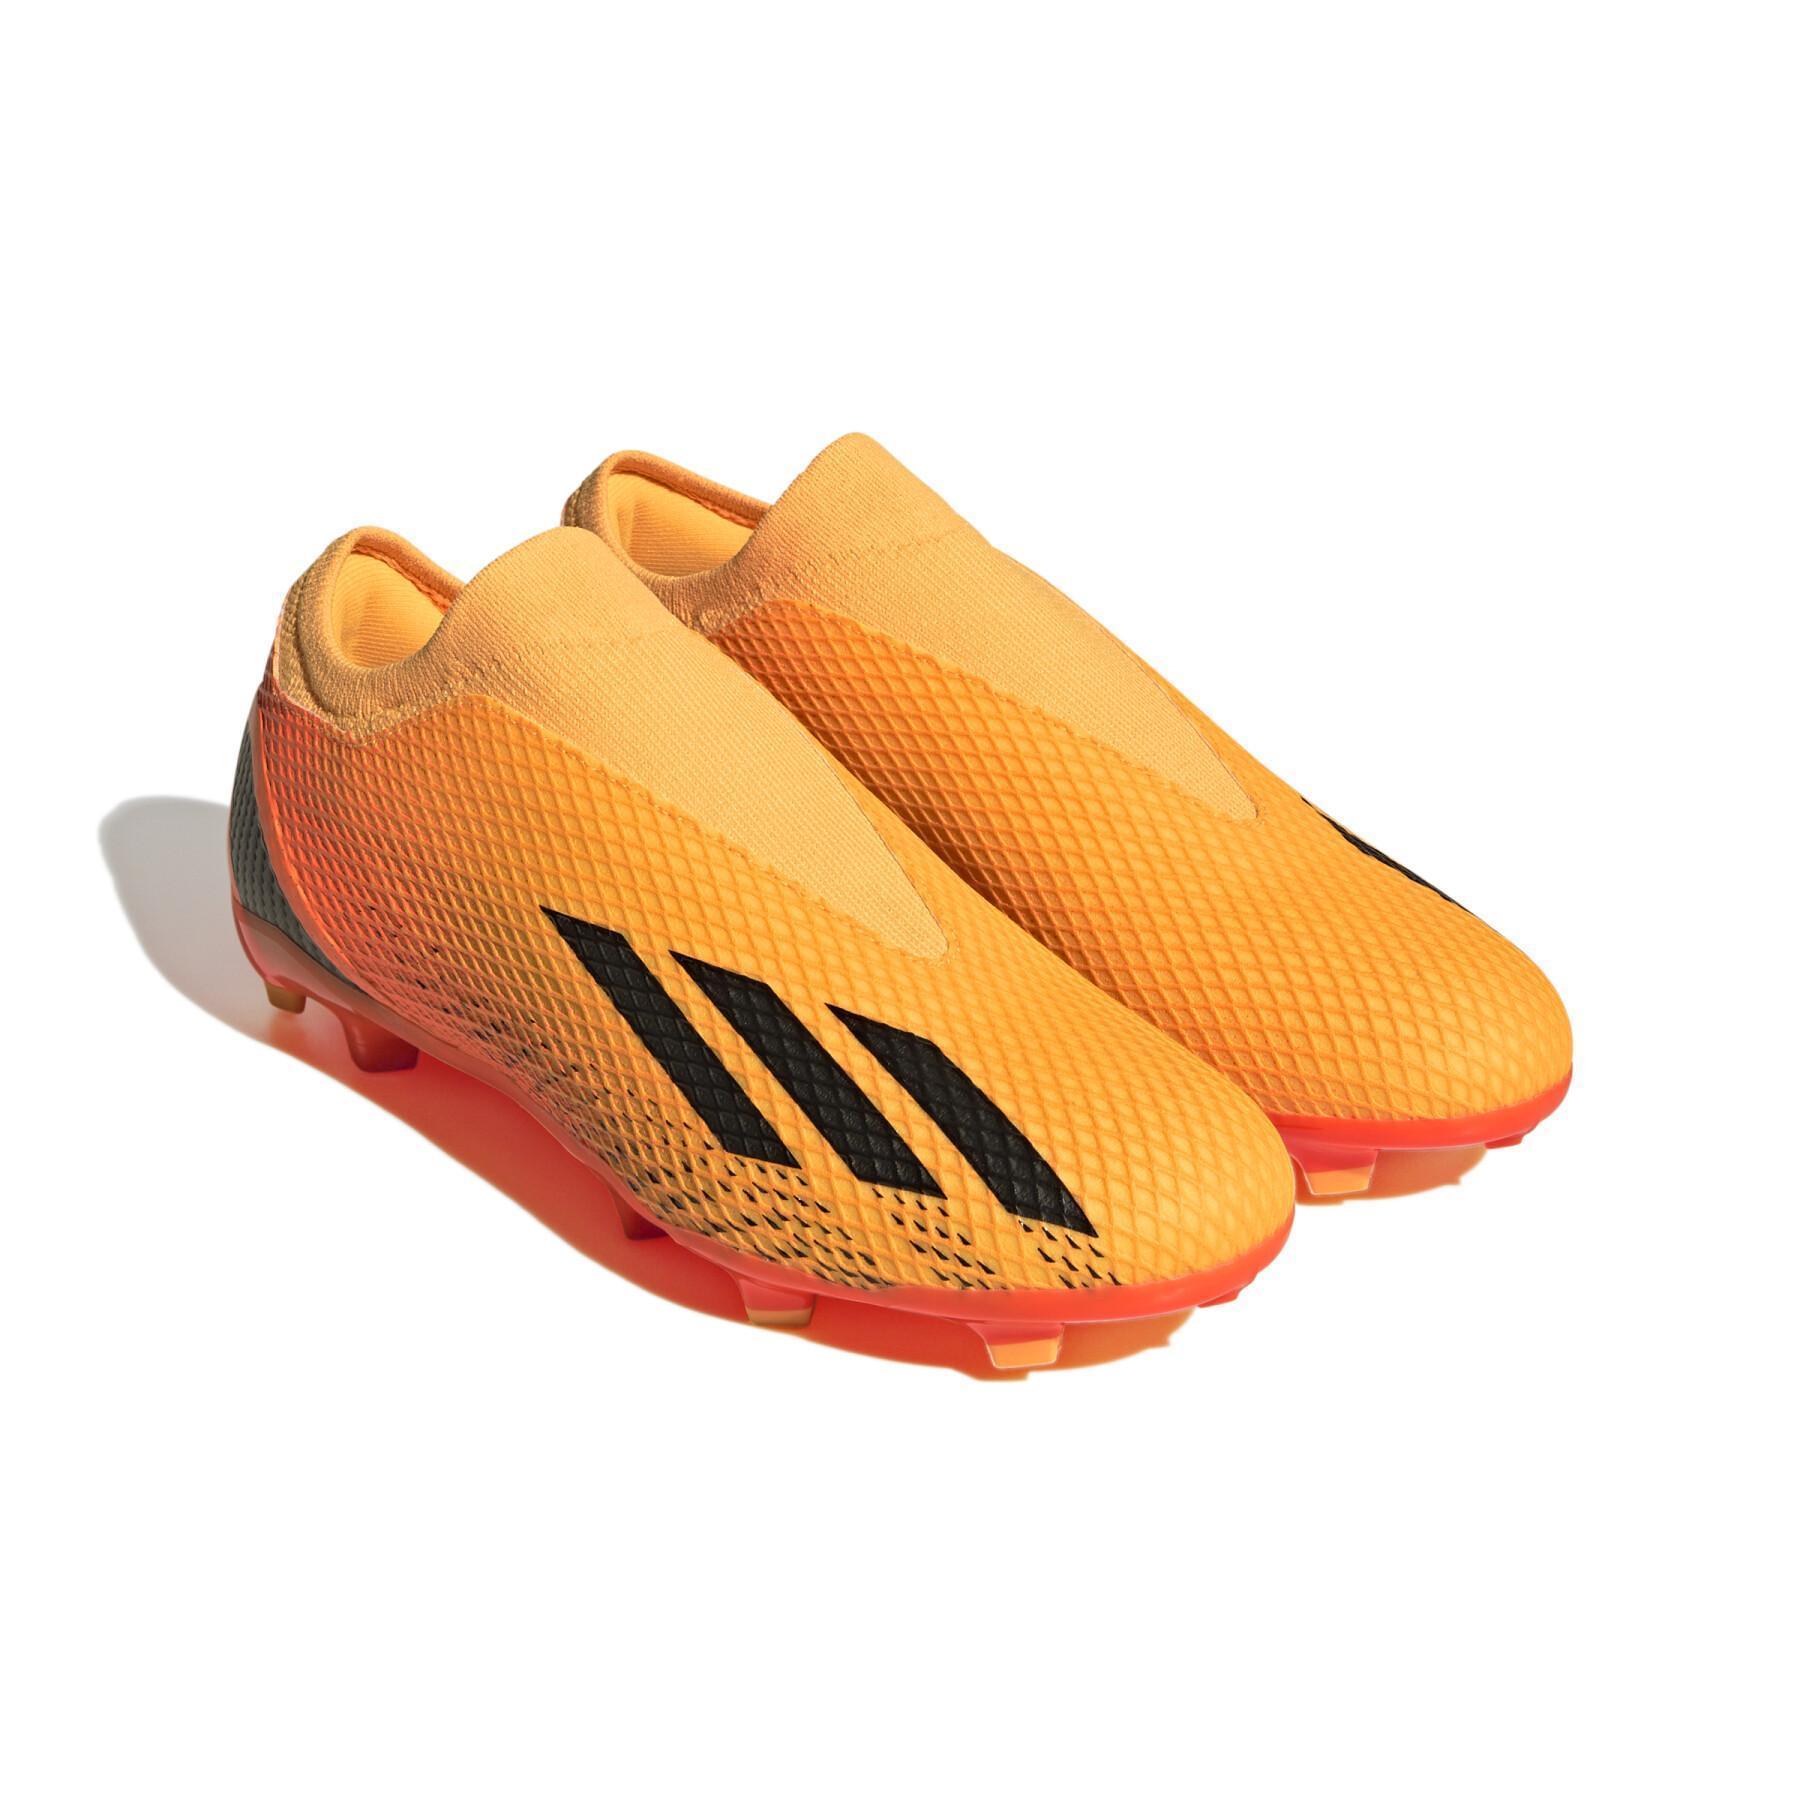 Soccer cleats without laces adidas X Speedportal.3 FG Heatspawn Pack